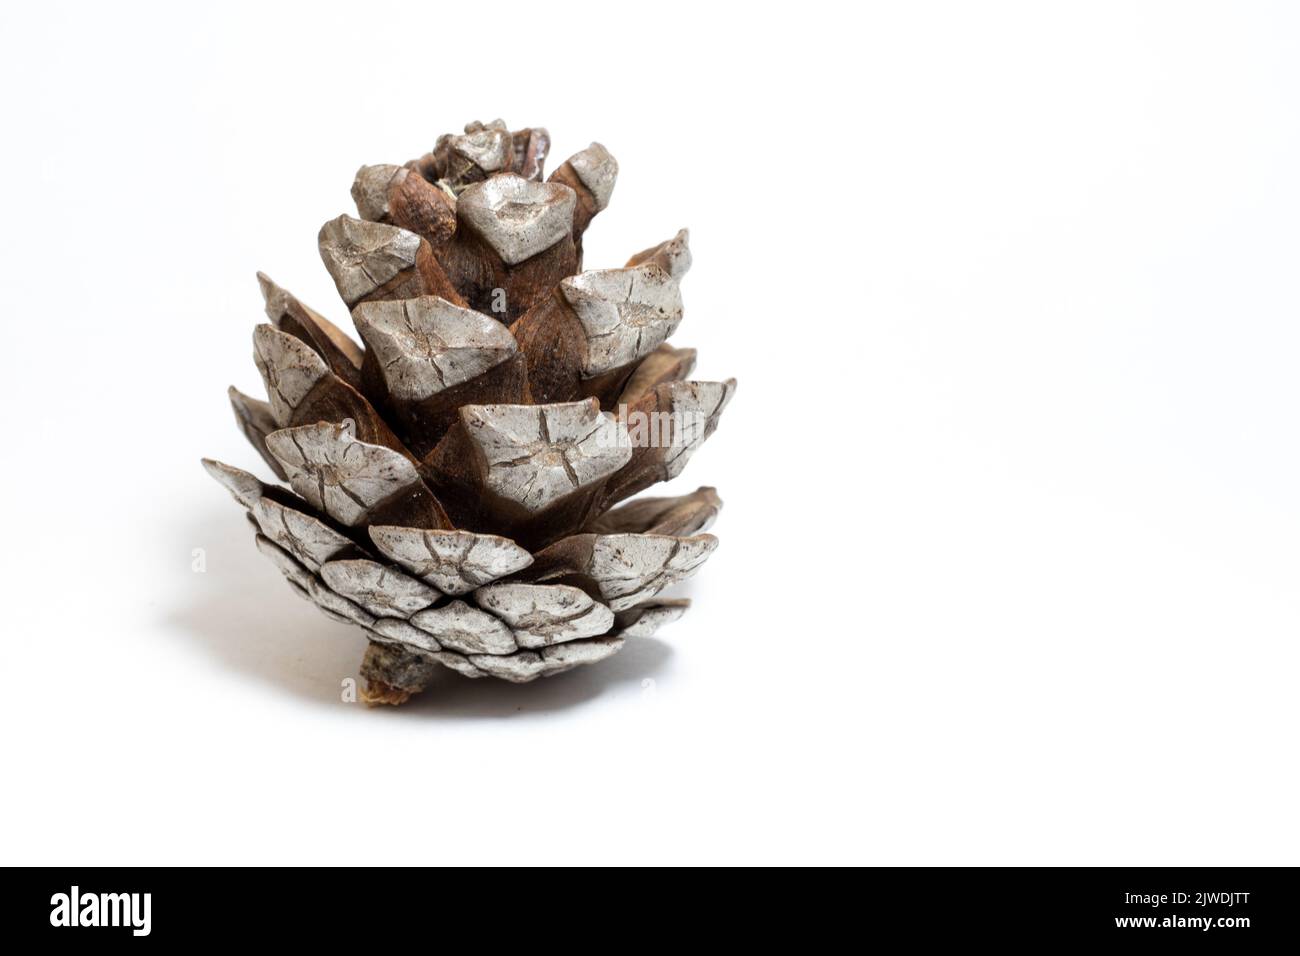 Unpeeled pinecone, dry pine cone isolated on white background. Conifer tree fruit idea concept. Copy space. Horizontal photo. Empty area. No people. Stock Photo